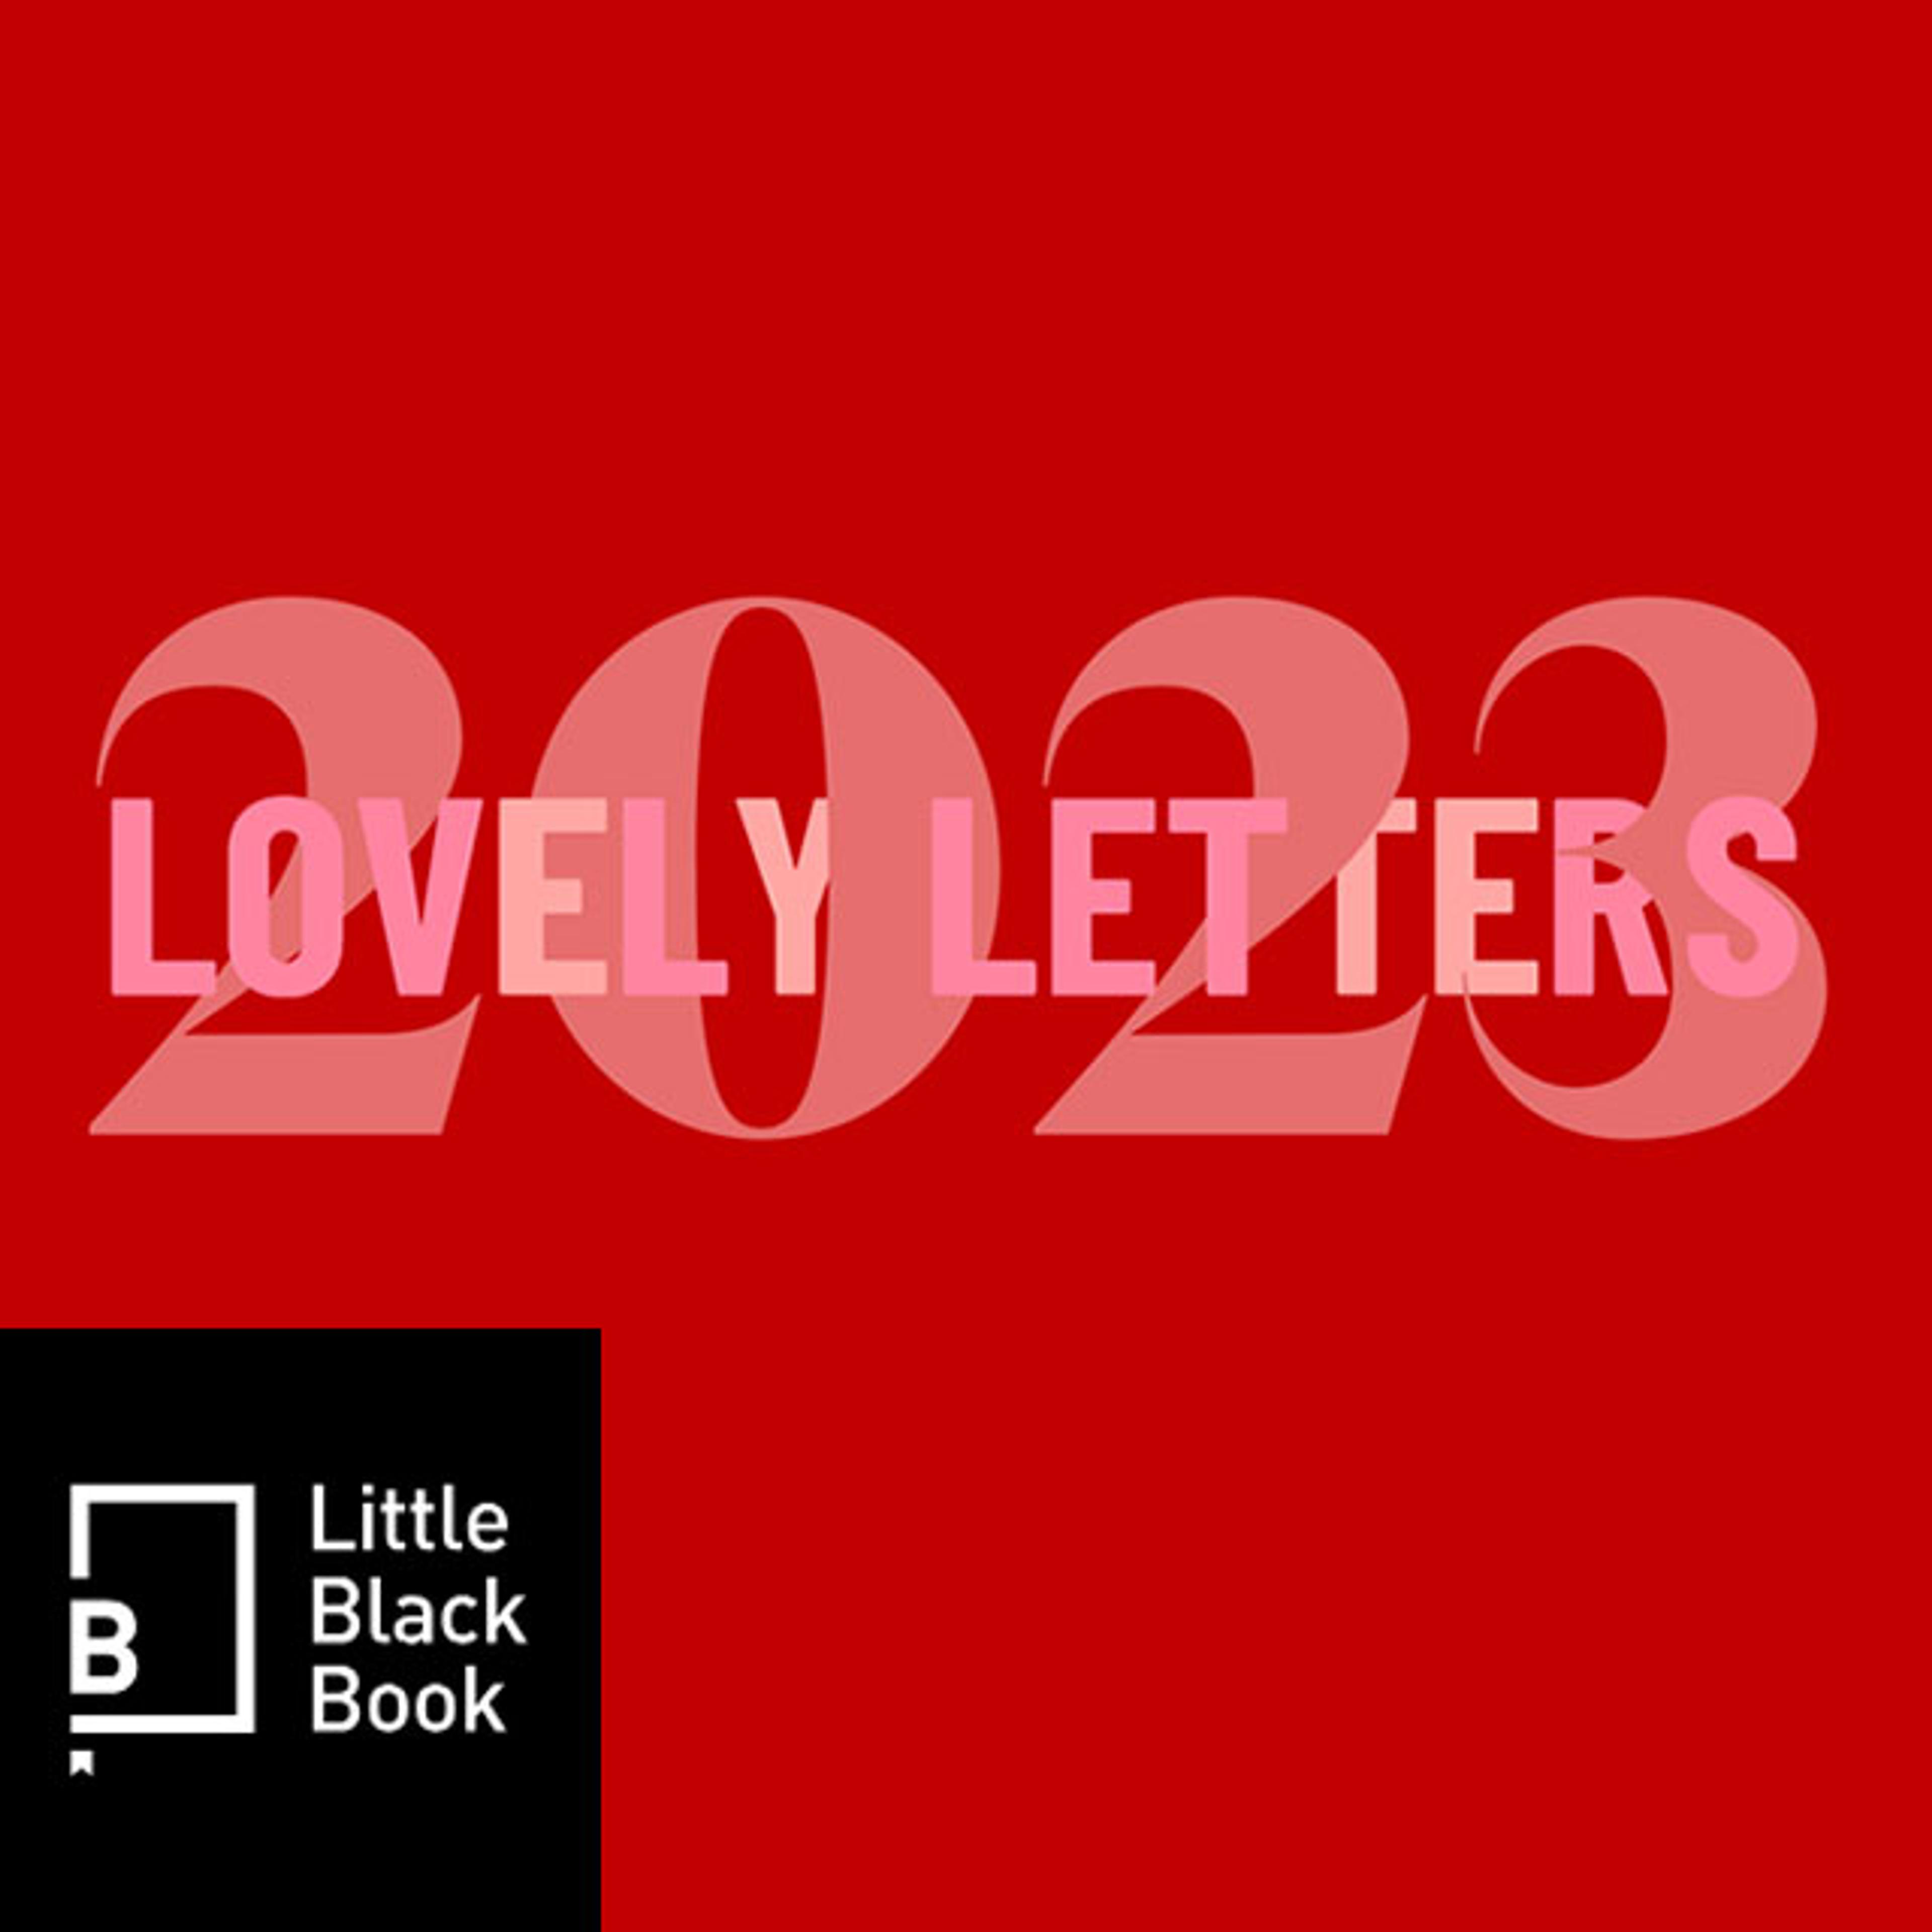 A screenshot of Lovely Letters 2023 logo